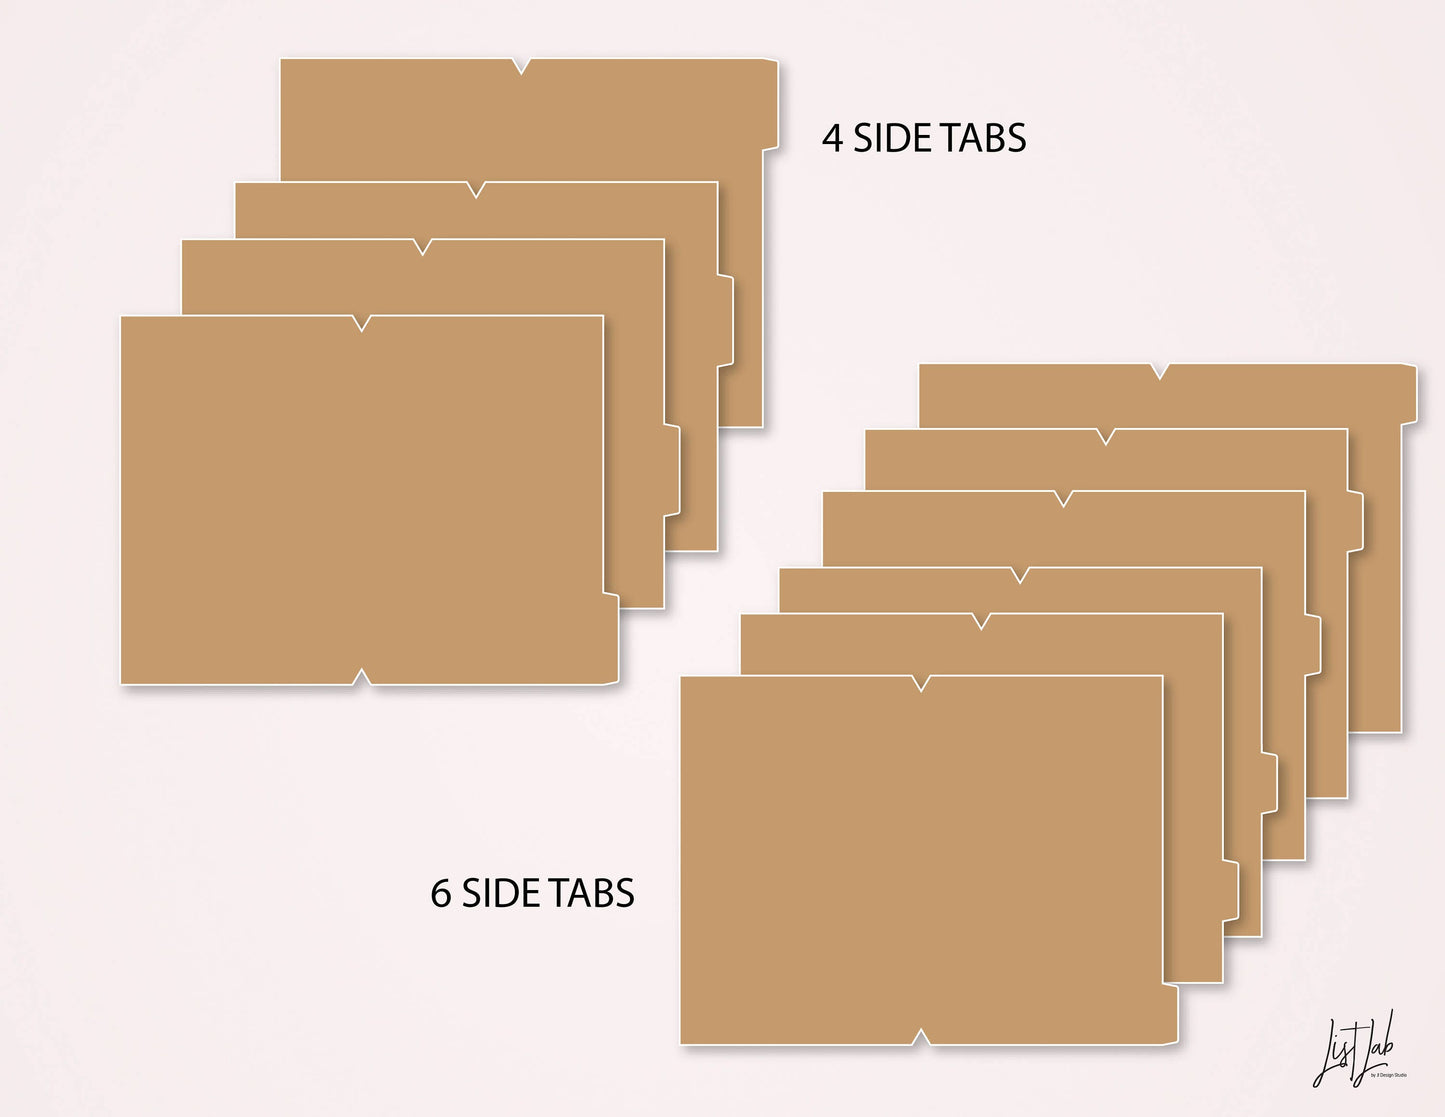 Pocket TN SIDE TABBED COVERS Kit Cutting Files Set